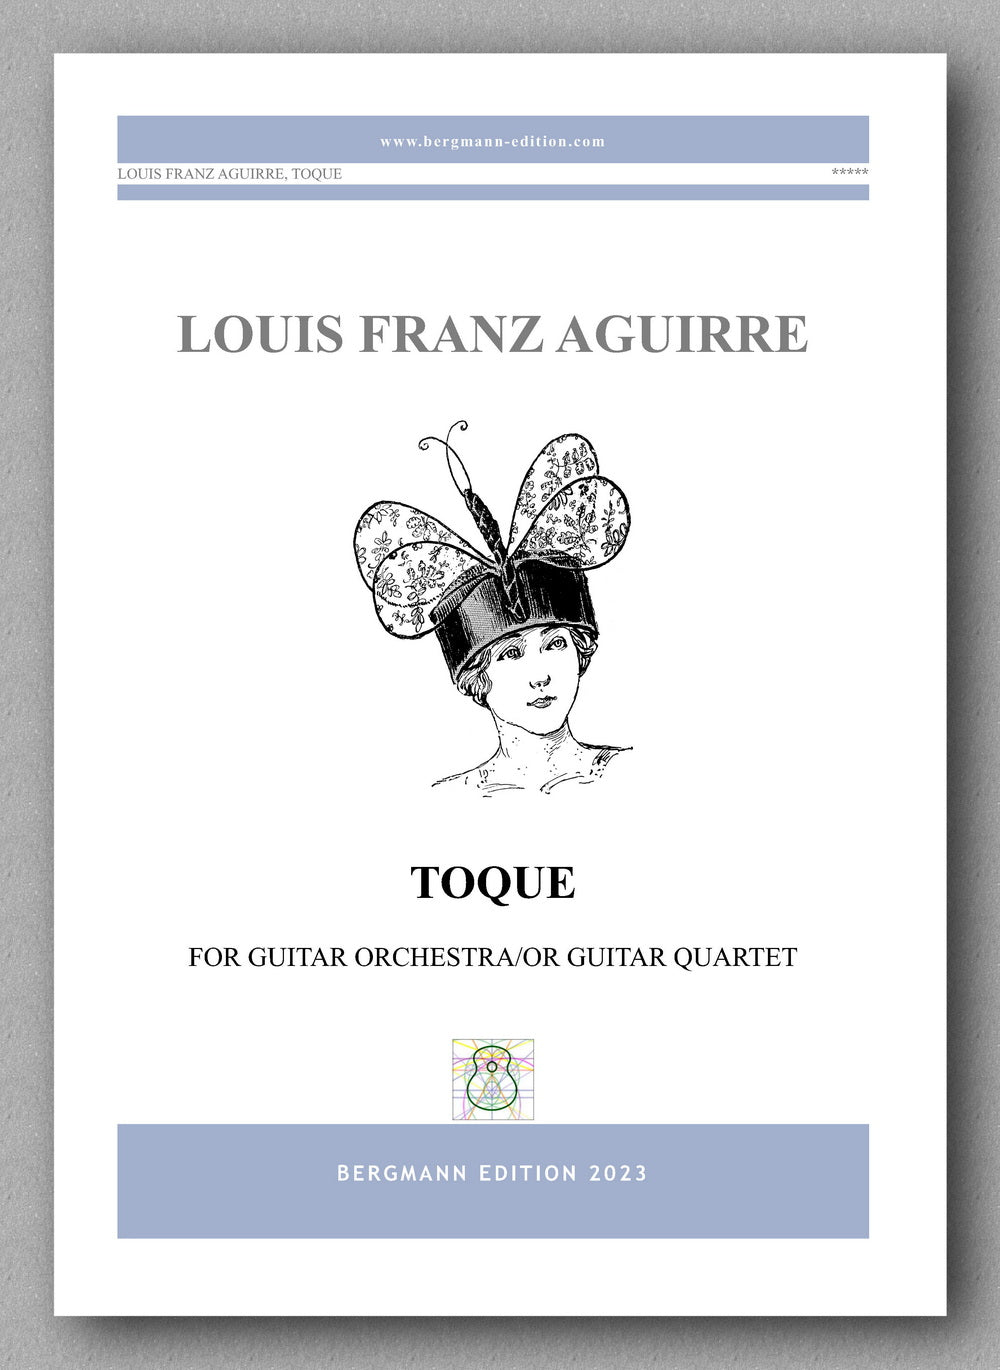 Louis Franz Aguirre, TOQUE - preview of the cover